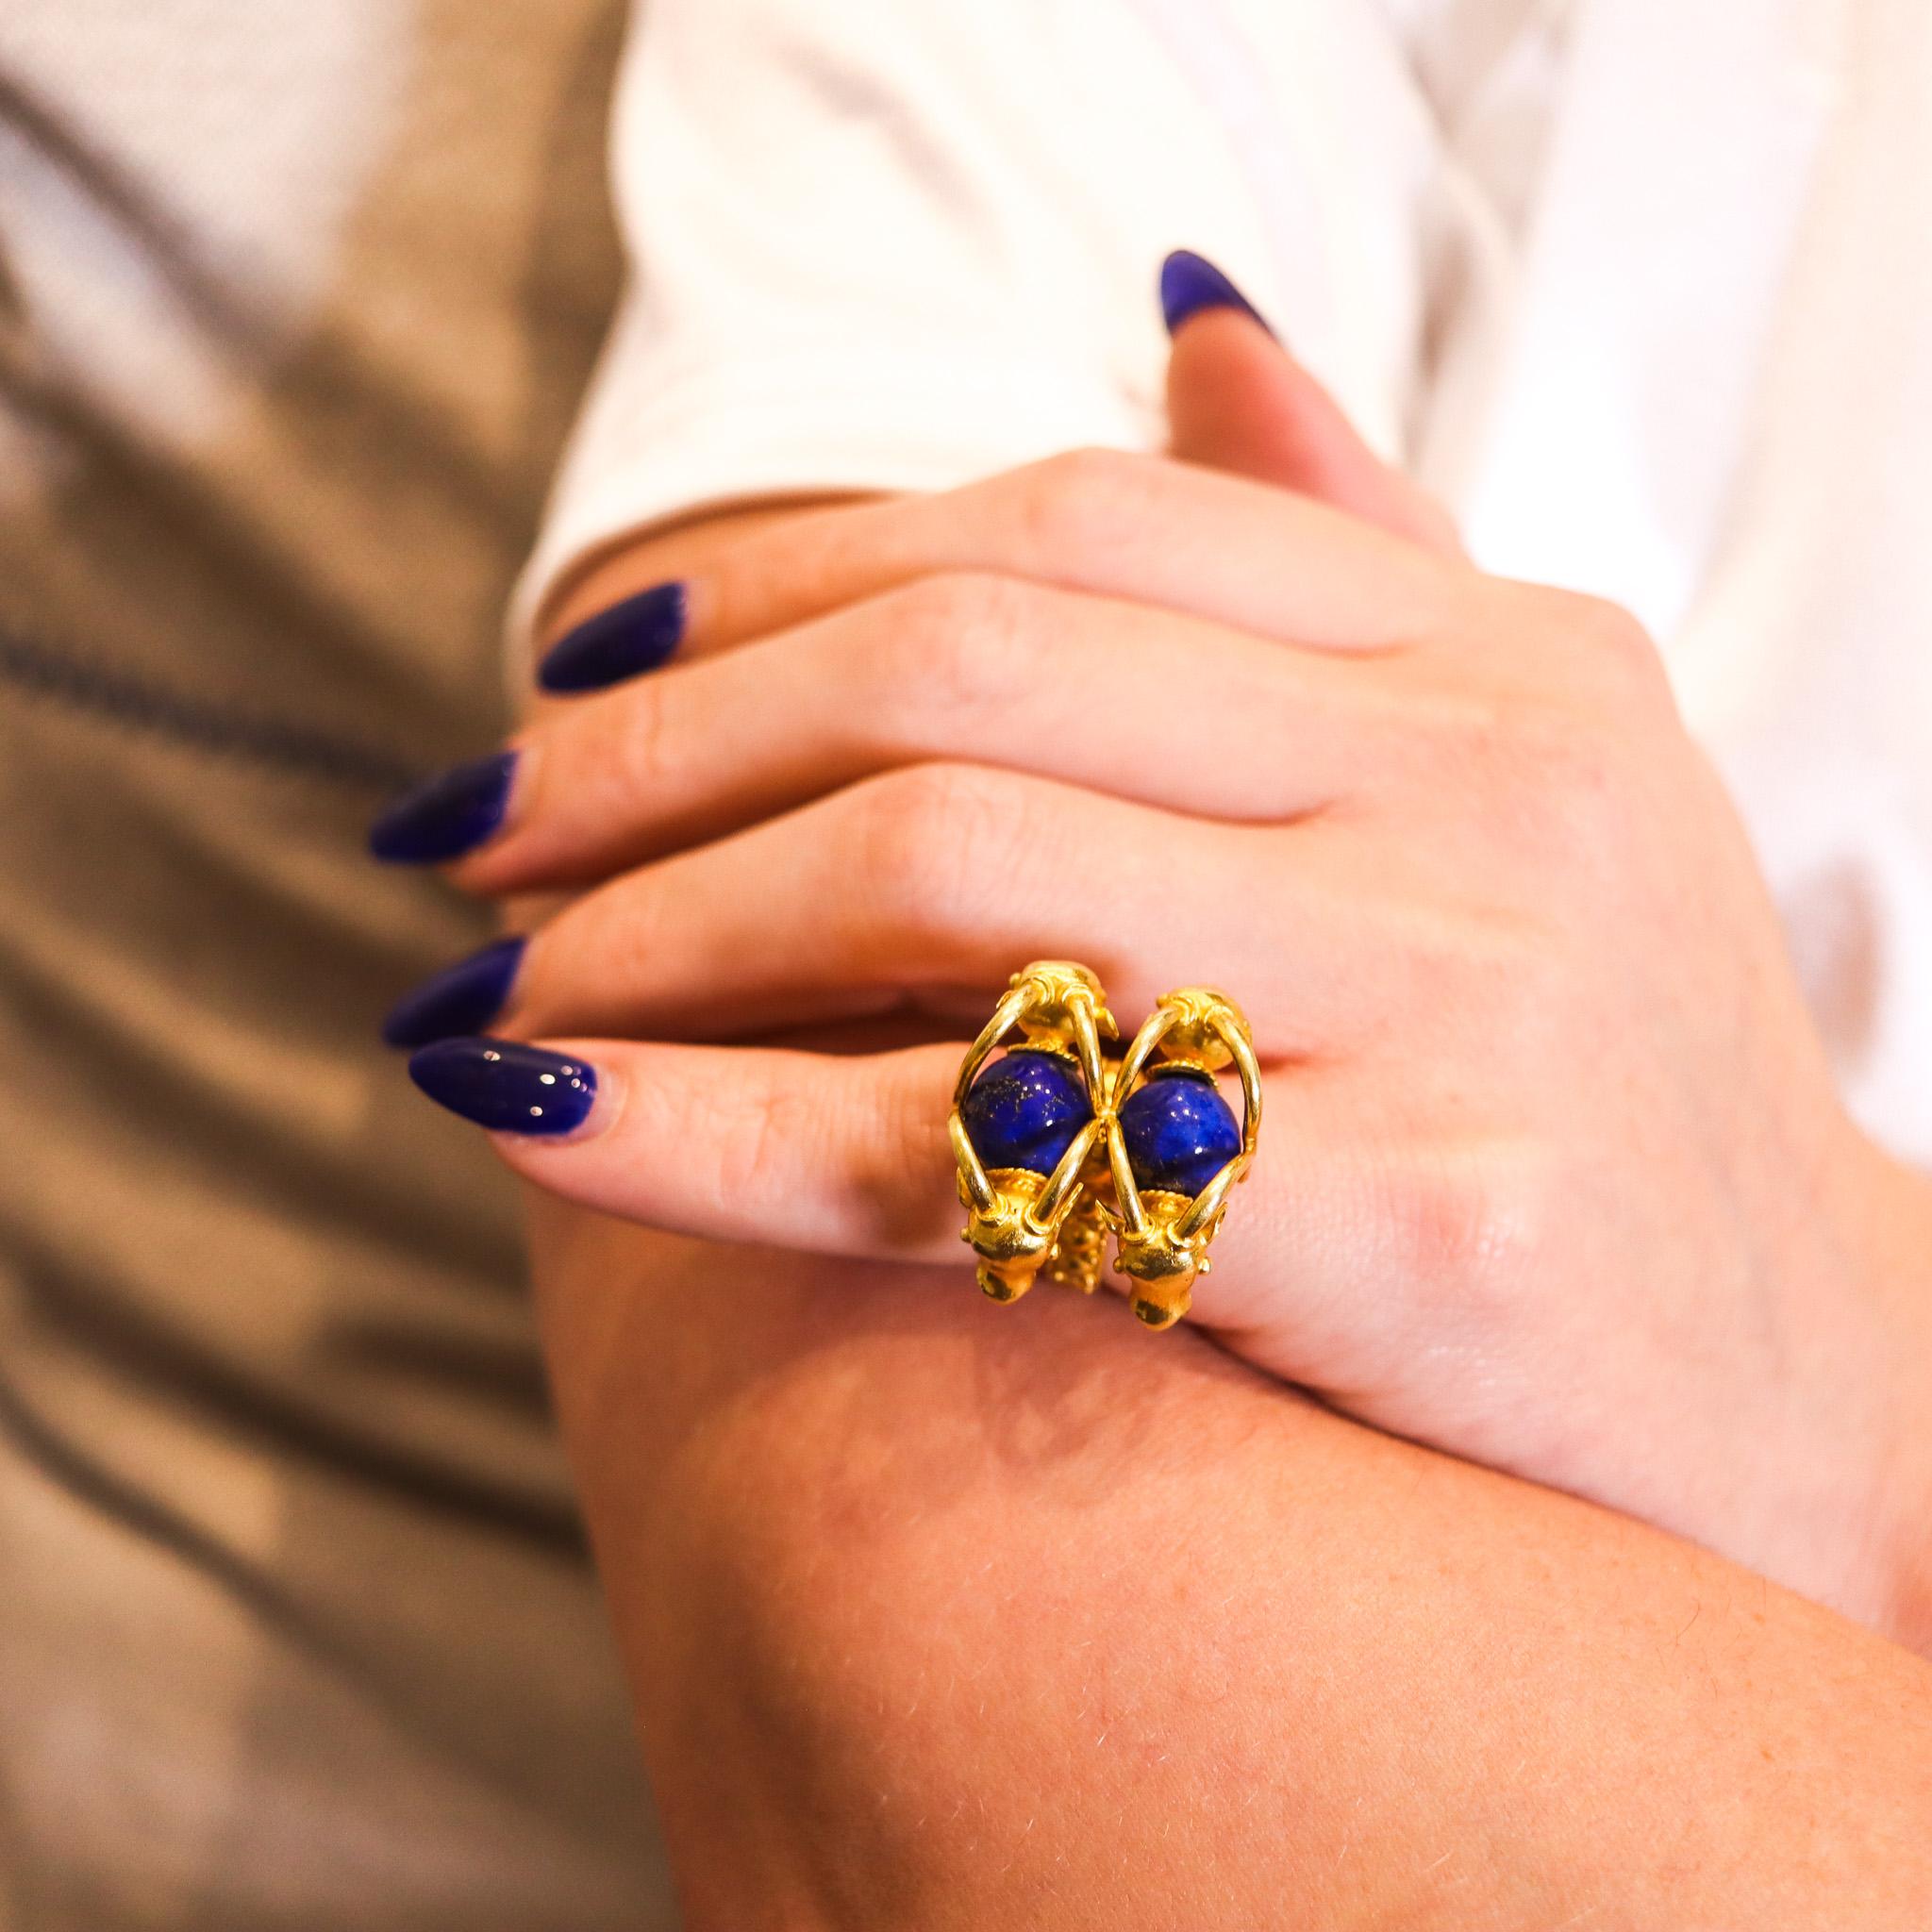 Zolotas Greek Four Rams Cocktail Ring In 21Kt Yellow Gold With Blue Lapis Lazuli For Sale 1